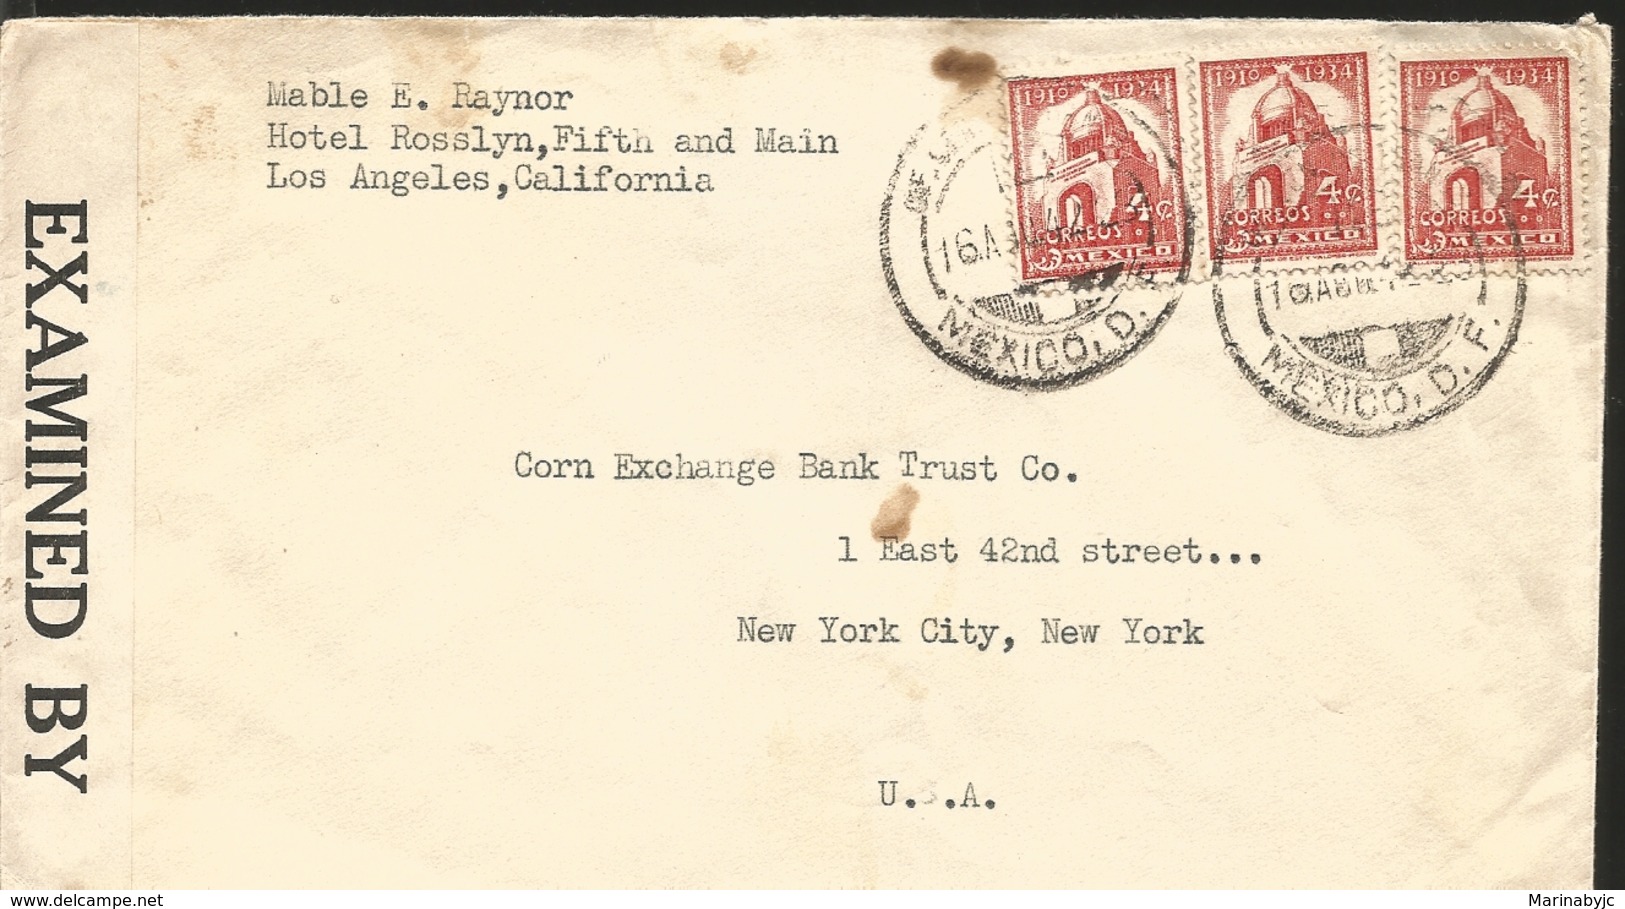 J) 1942 MEXICO, MONUMENT TO THE REVOLUTION, OPEN BY EXAMINER, MULTIPLE STAMPS, AIRMAIL, CIRCULATED COVER, FROM CALIFORNI - Mexico